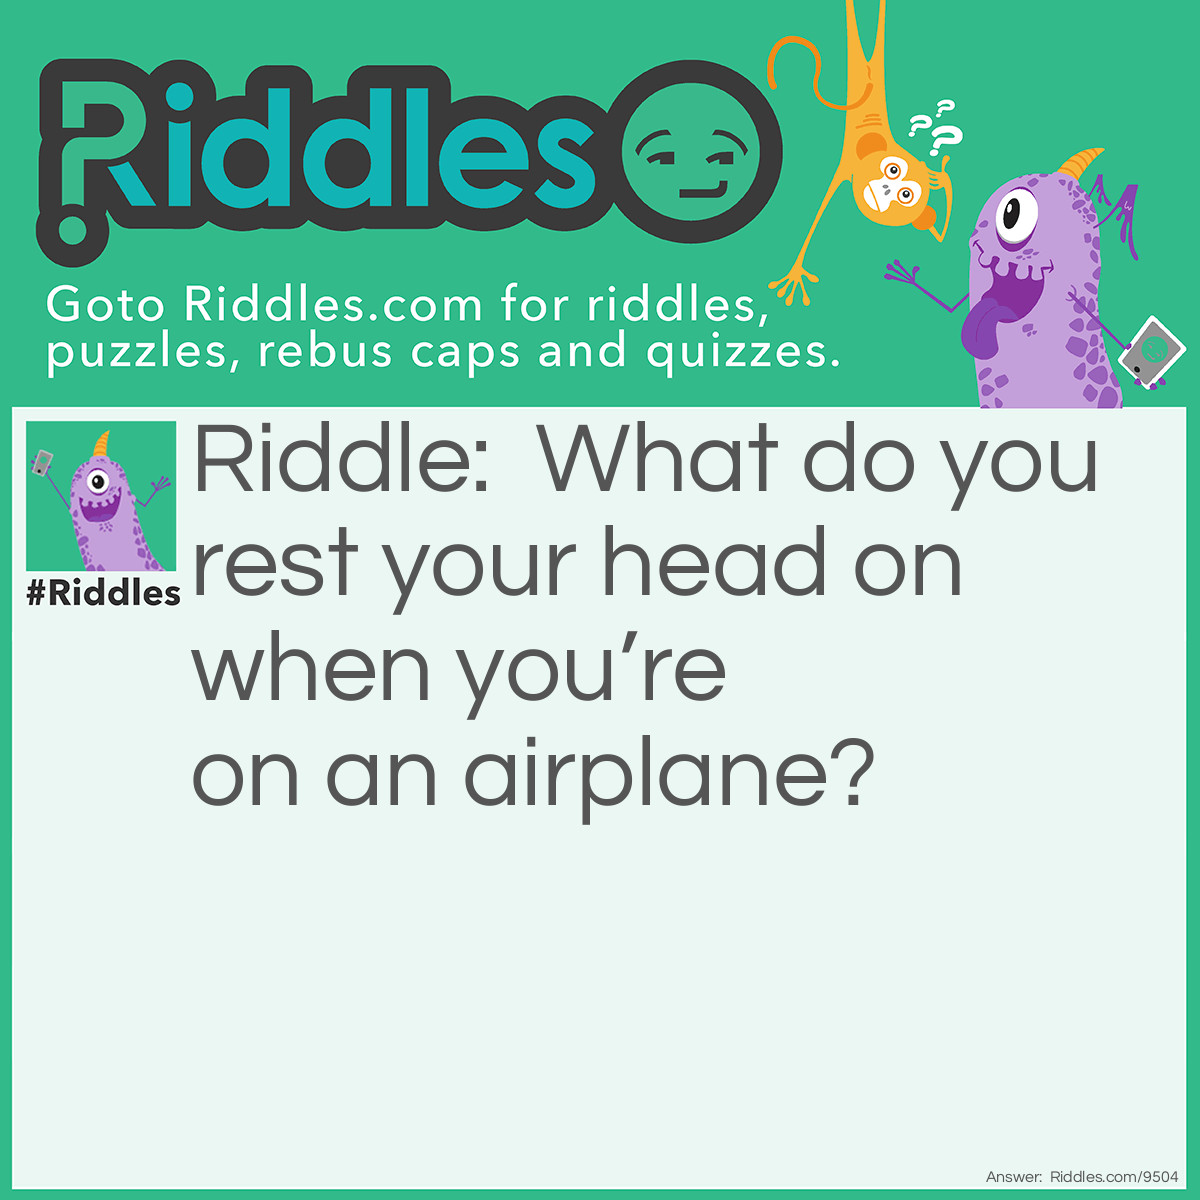 Riddle: What do you rest your head on when you're on an airplane? Answer: A pil-high.